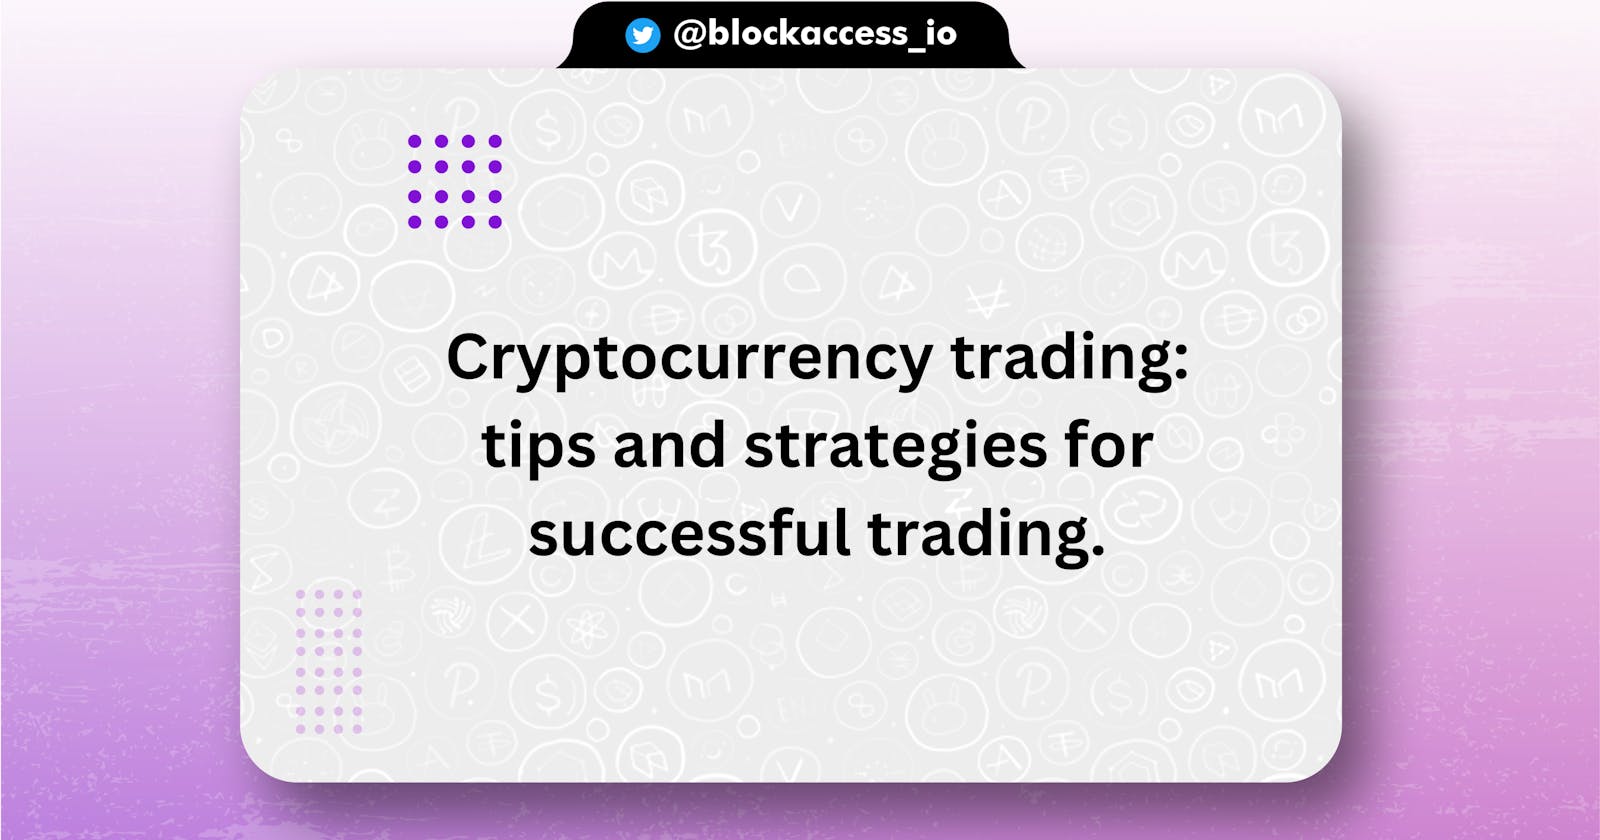 Cryptocurrency trading: tips and strategies for successful trading